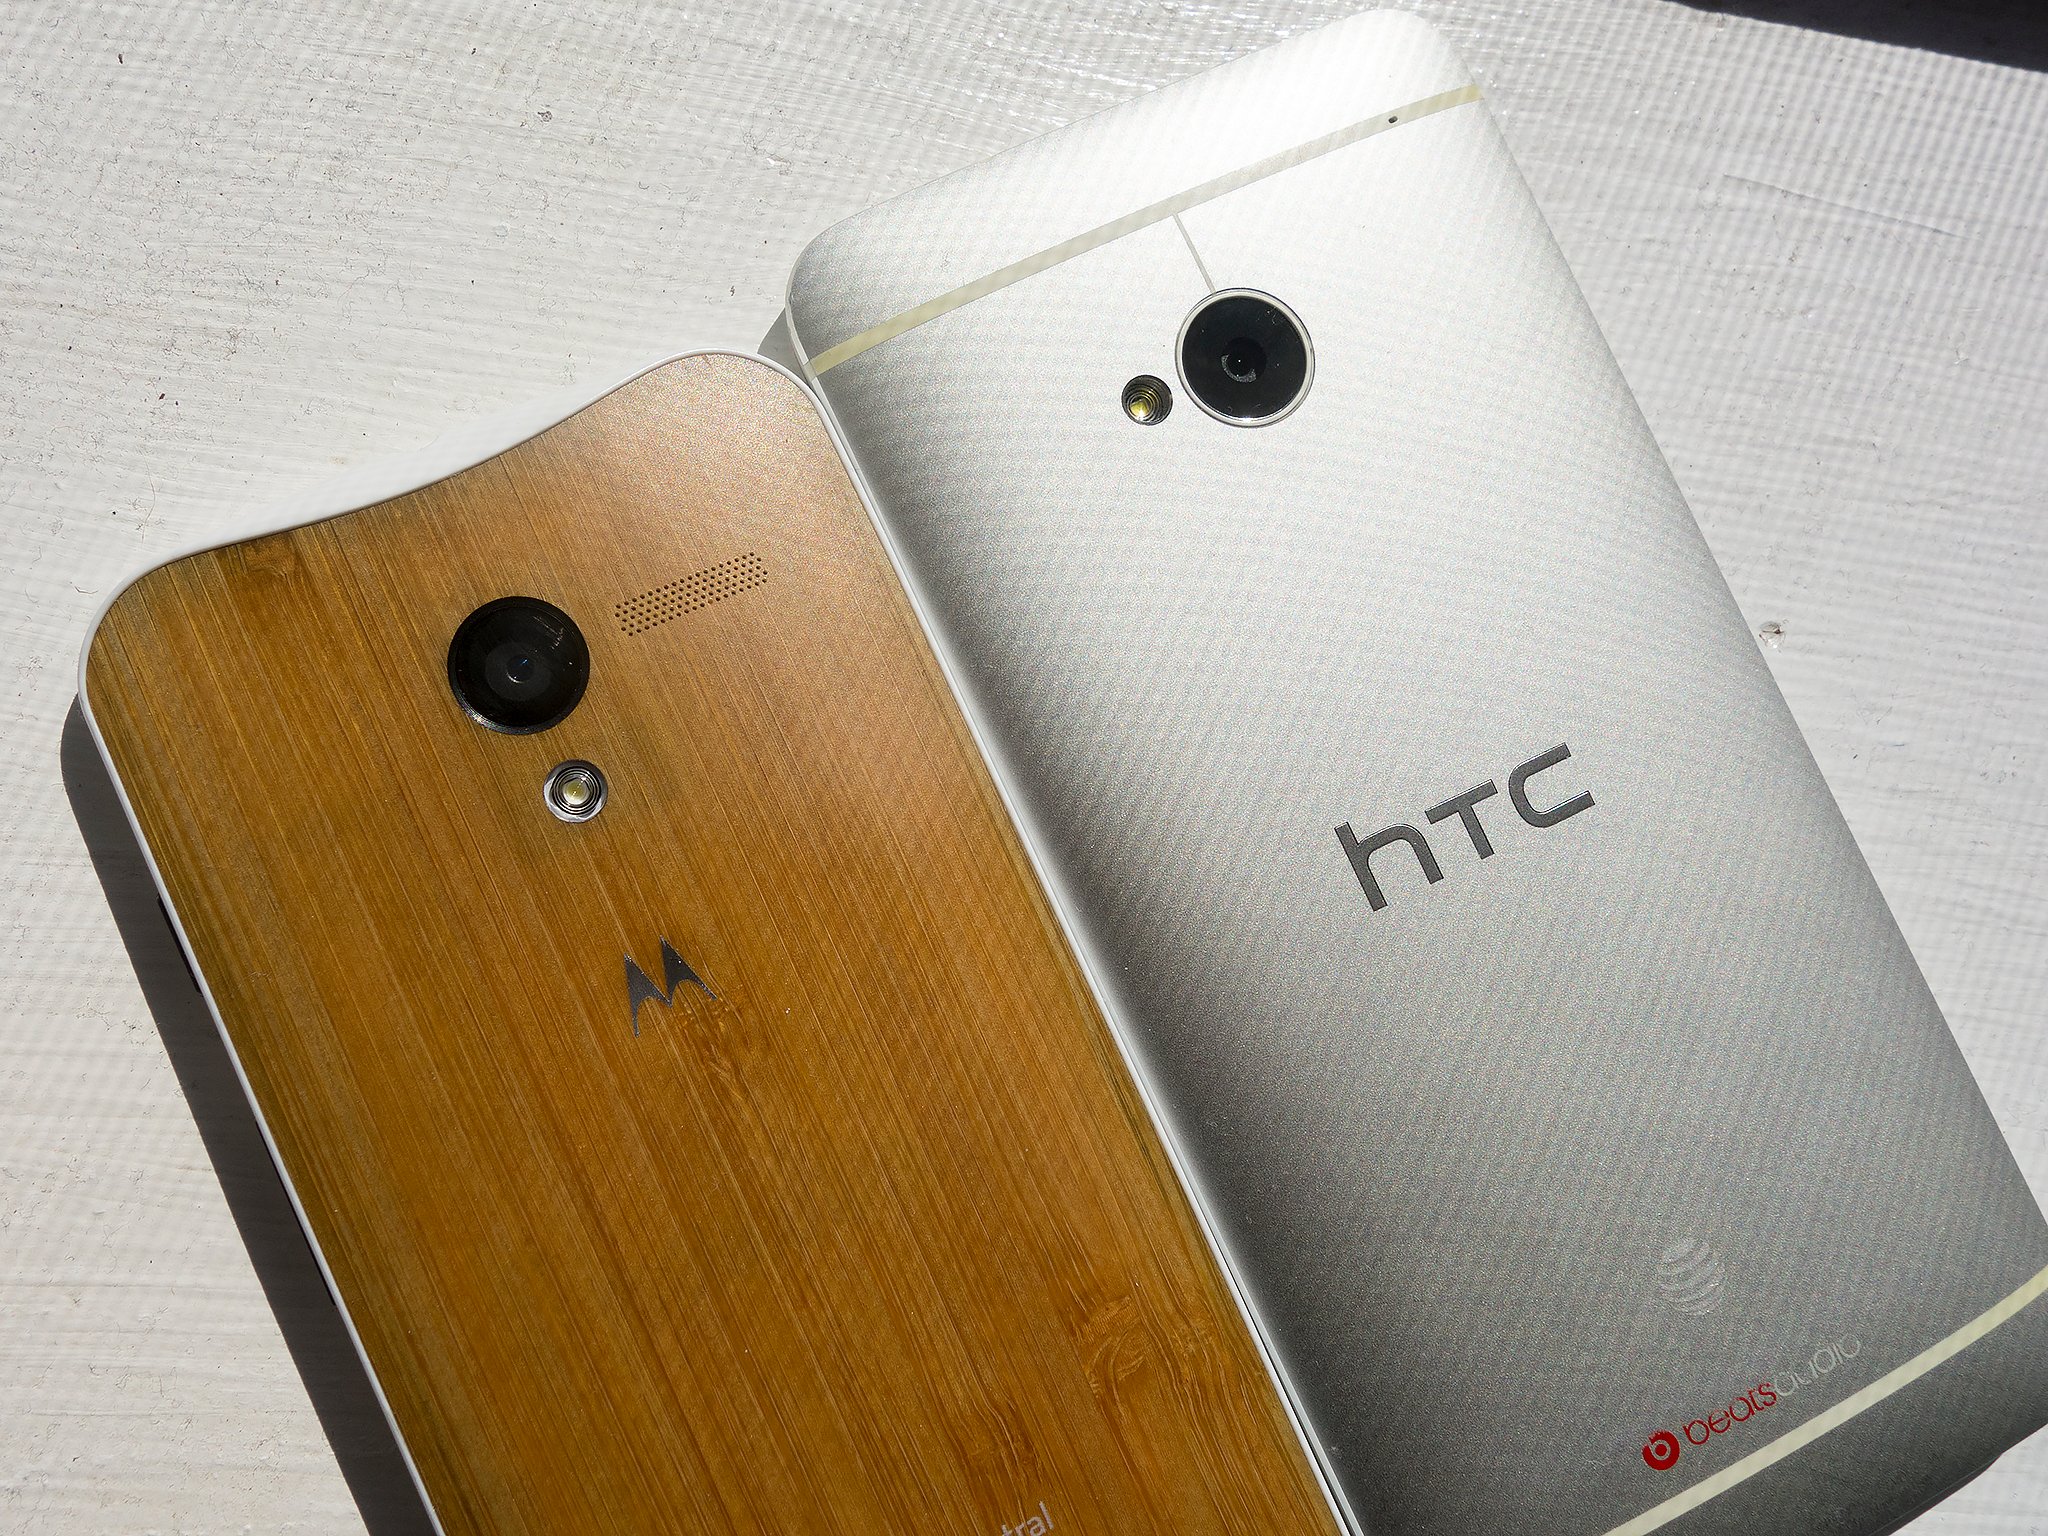 Moto X and HTC One